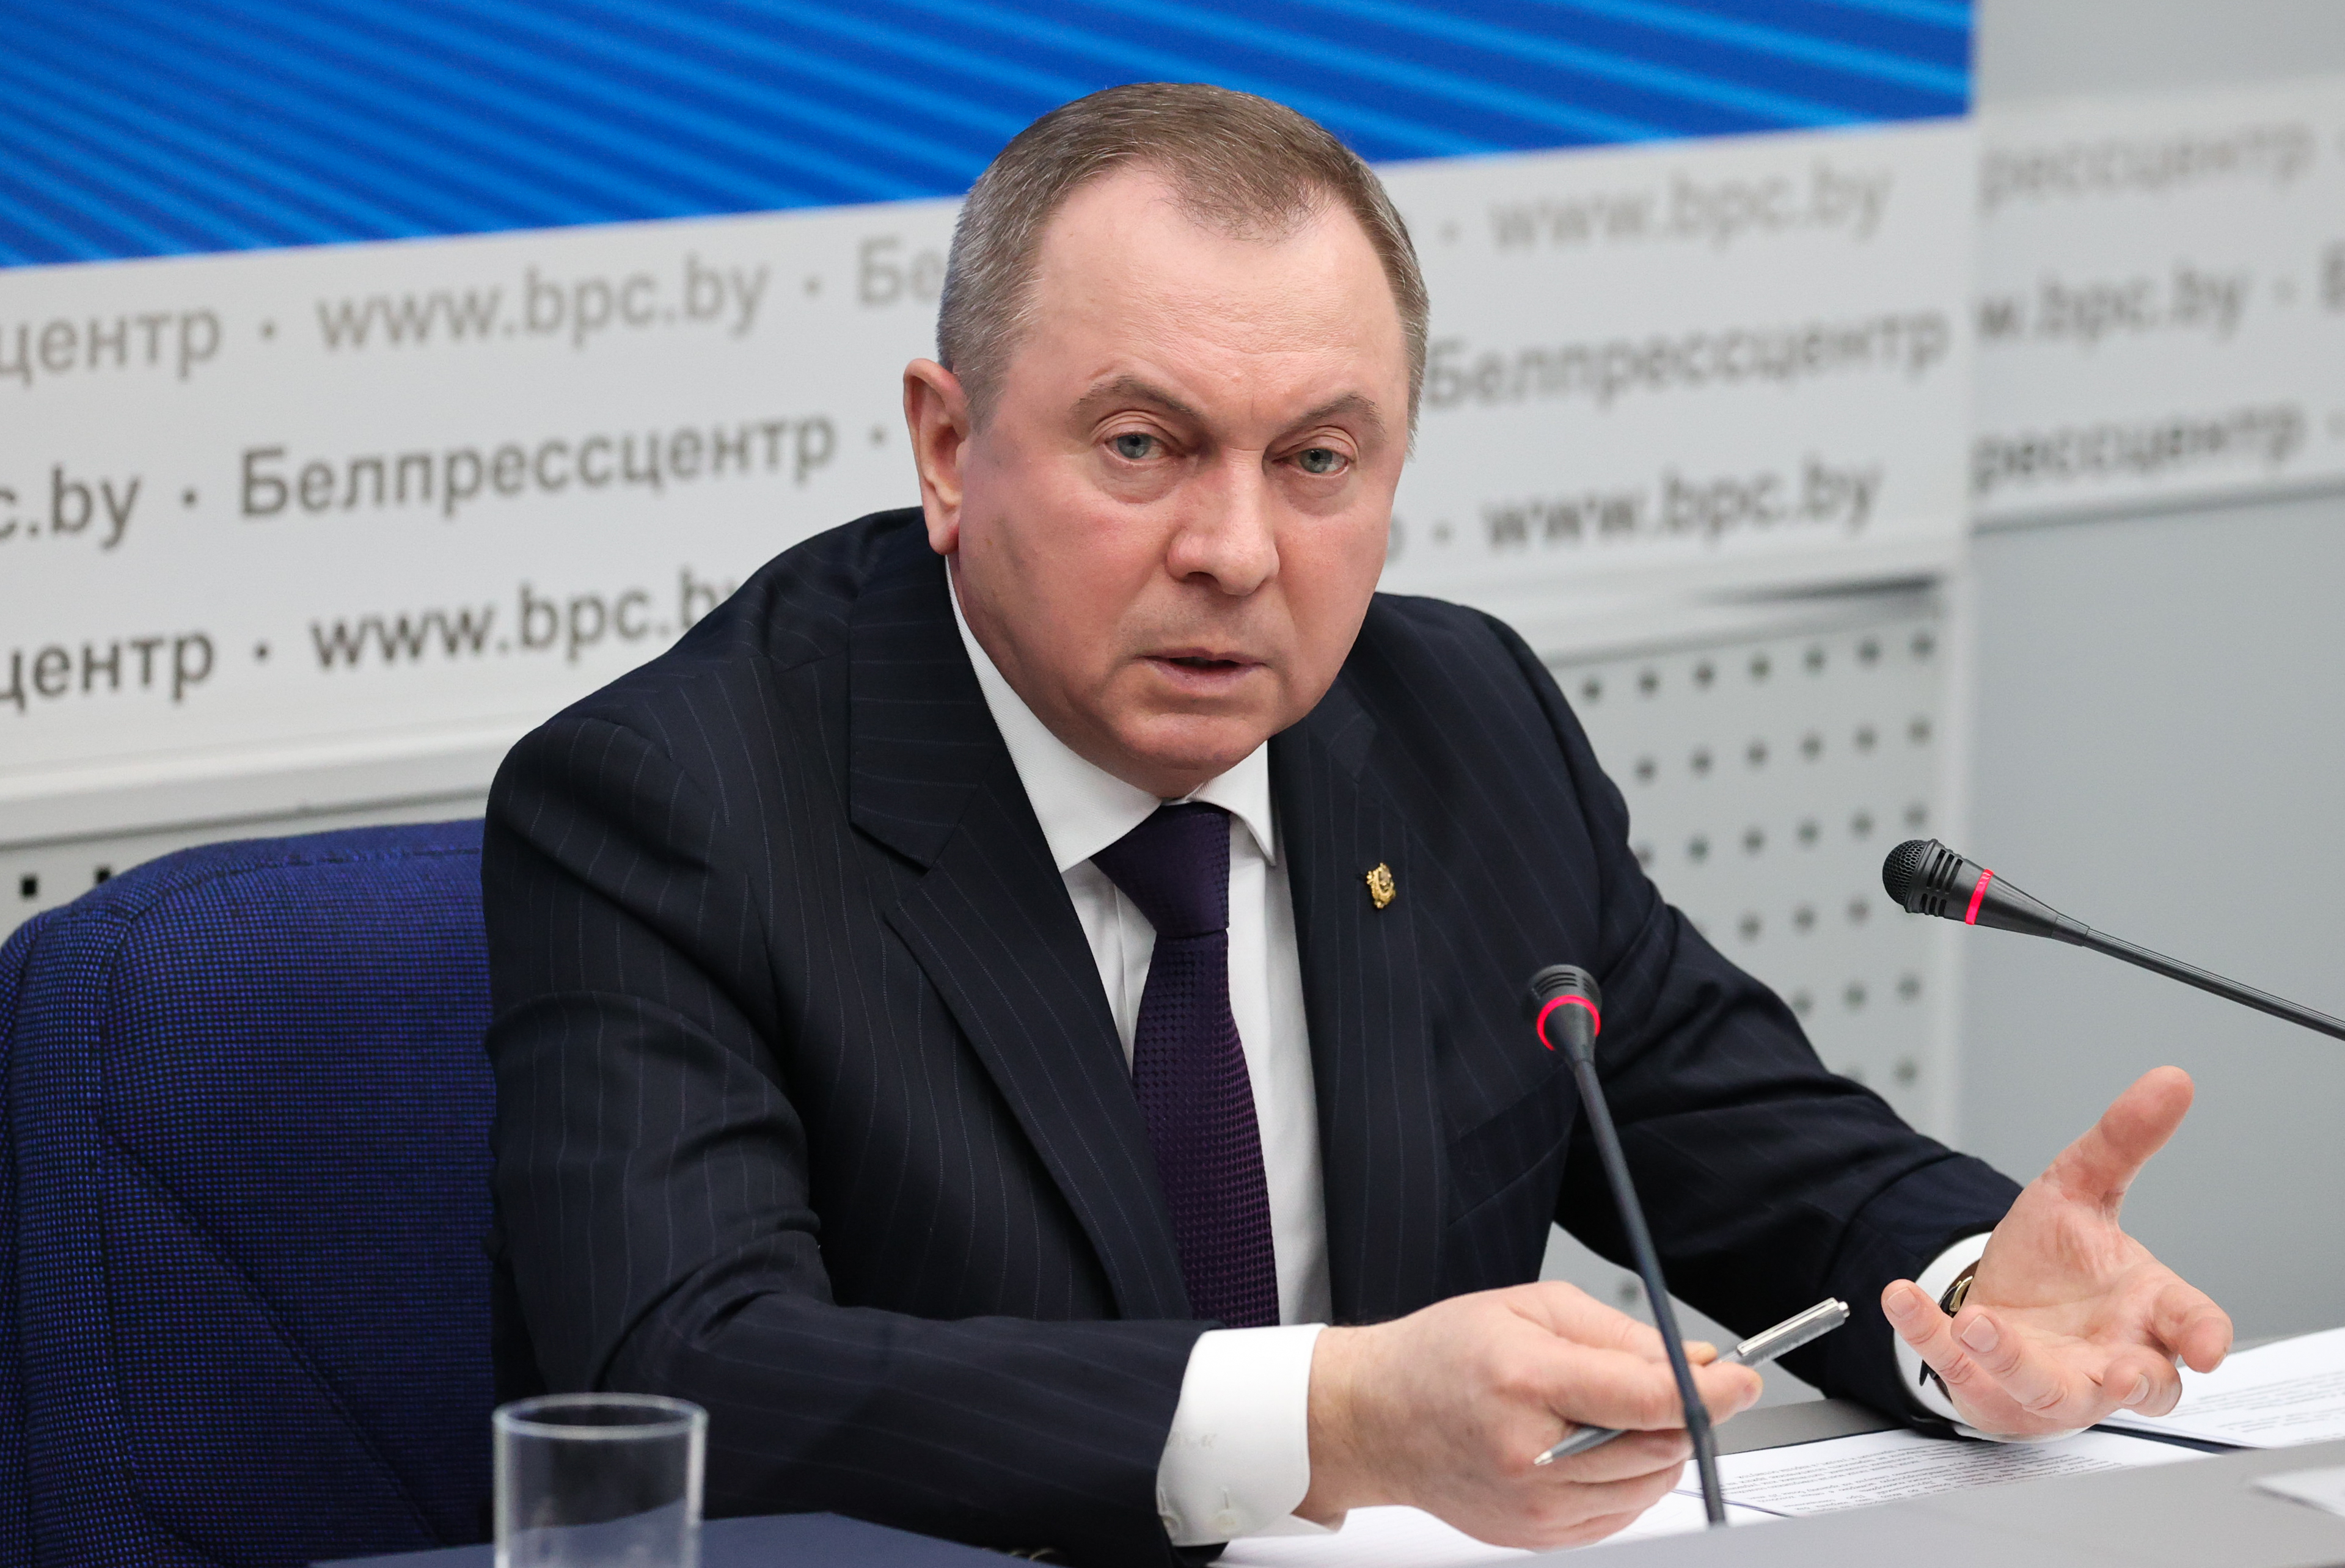 Belarus Foreign Minister Vladimir Makei gives a press conference at the National Press Centre in Minsk, Belarus, on February 16.